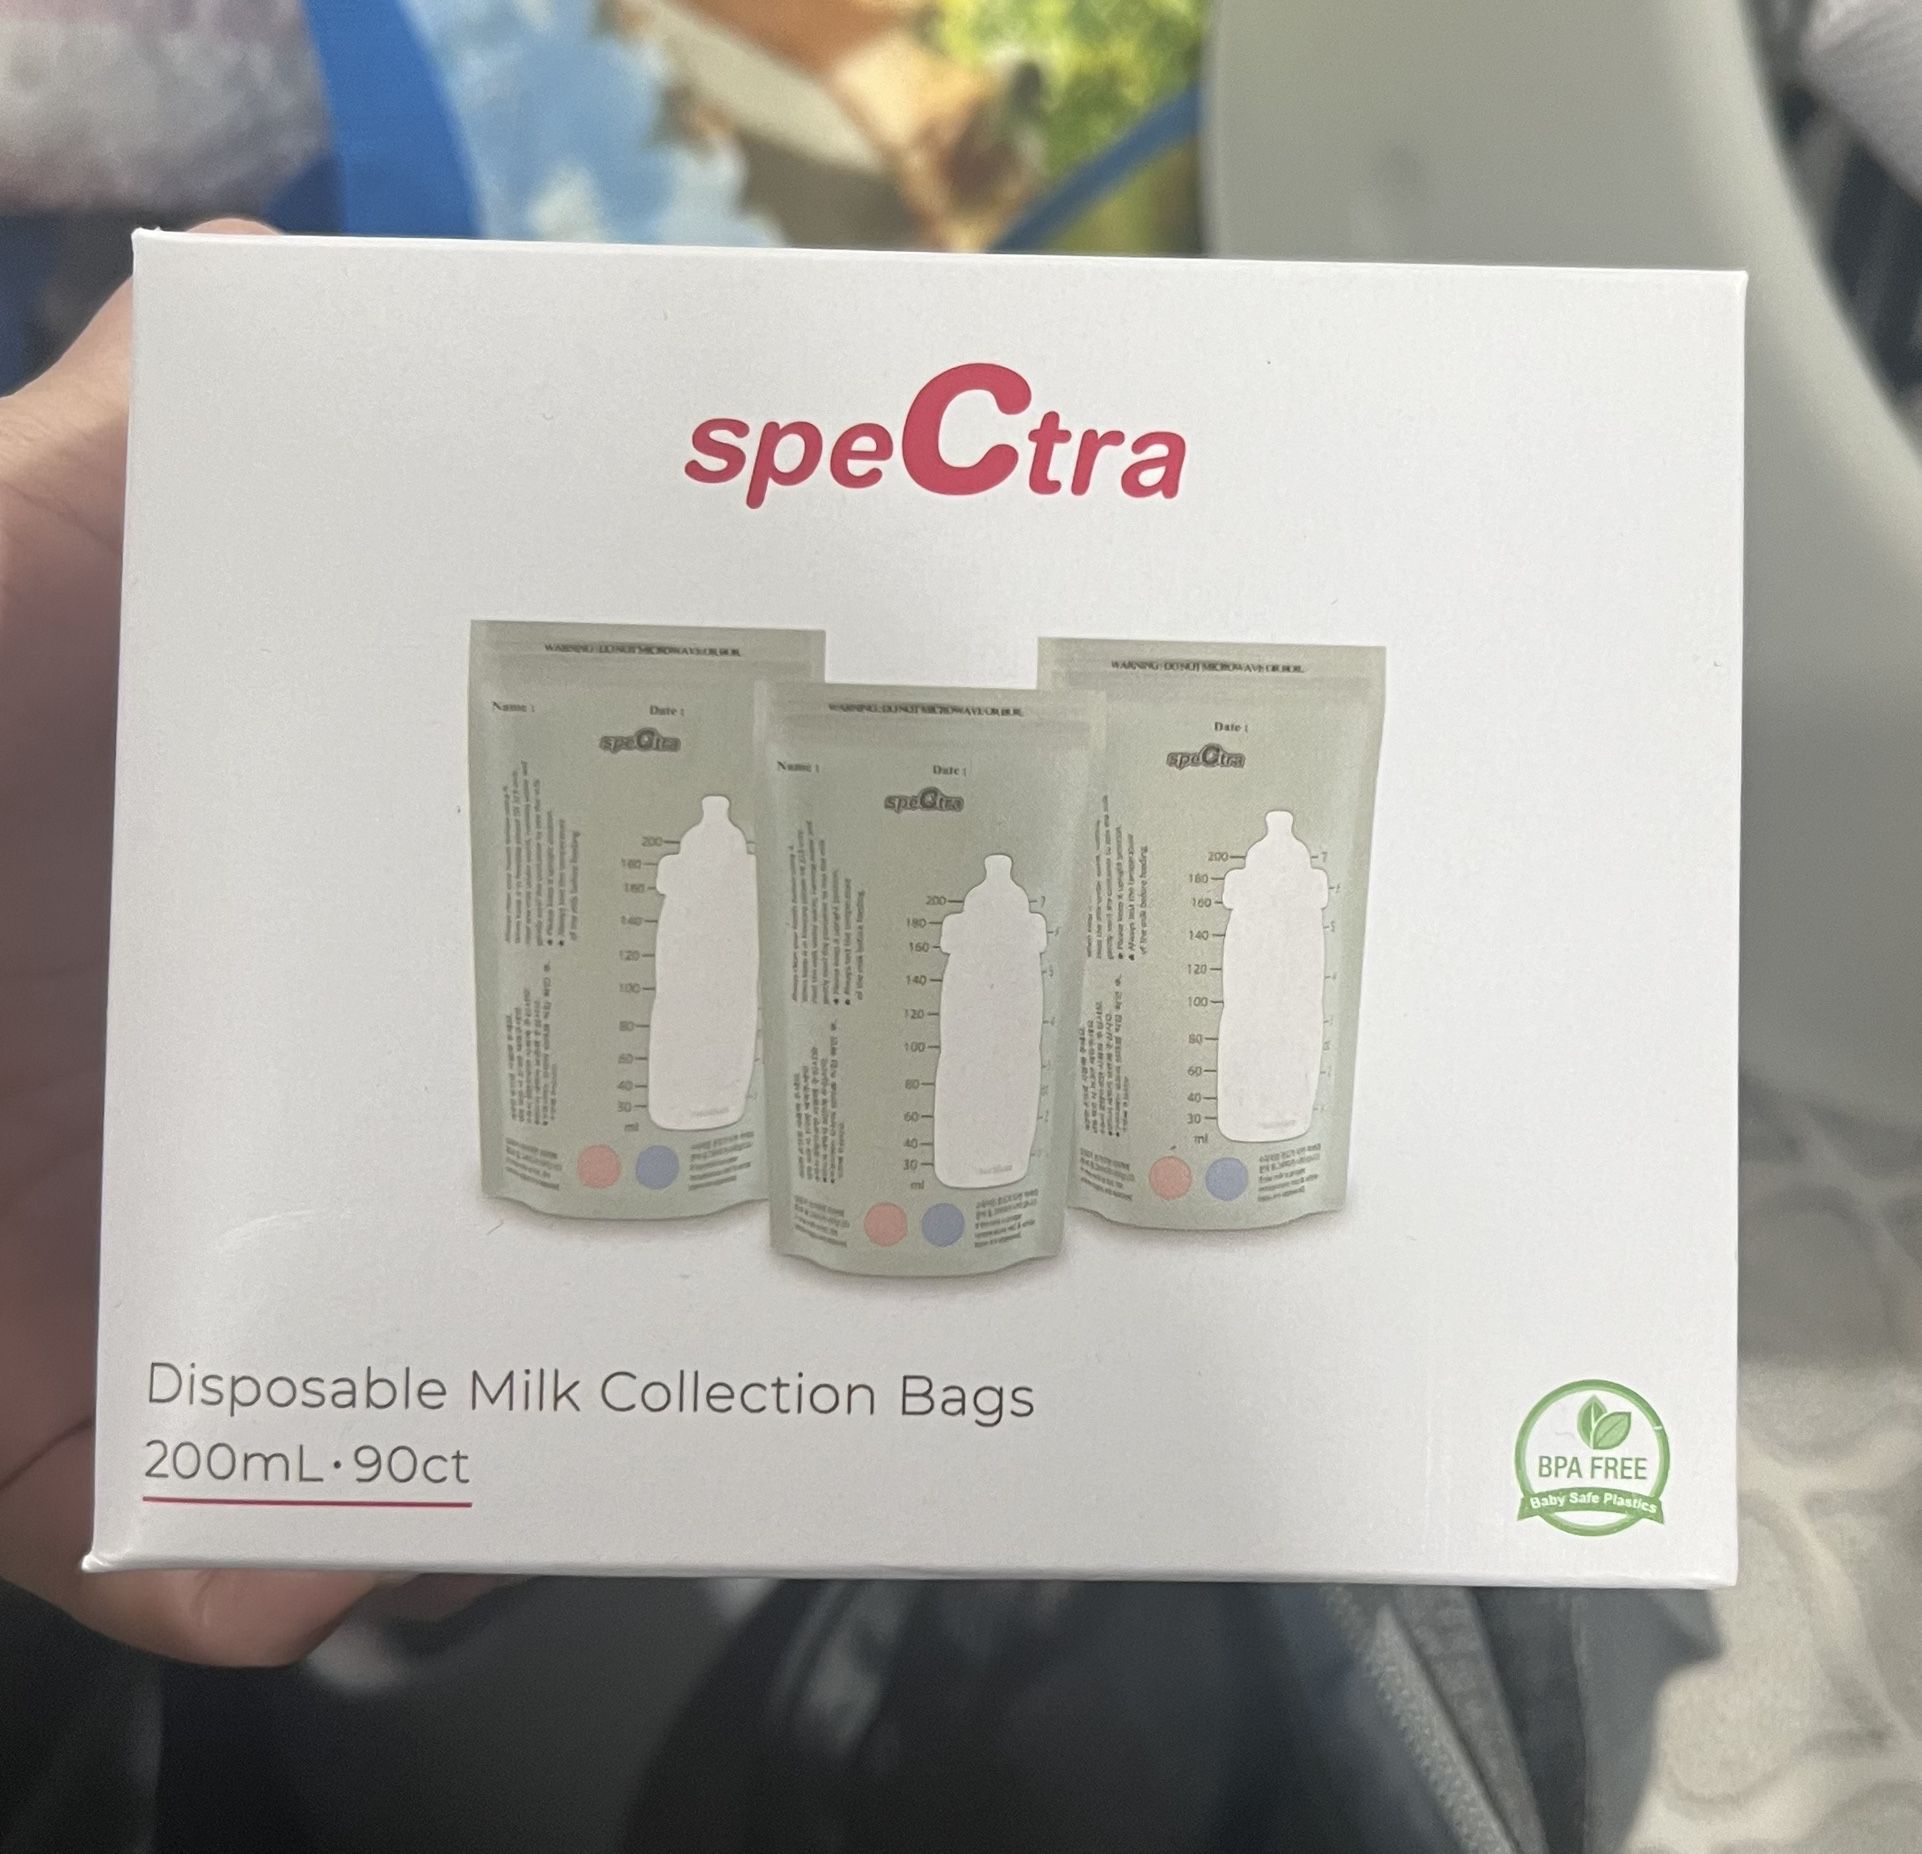 Spectra - Disposable Milk Collection Bags